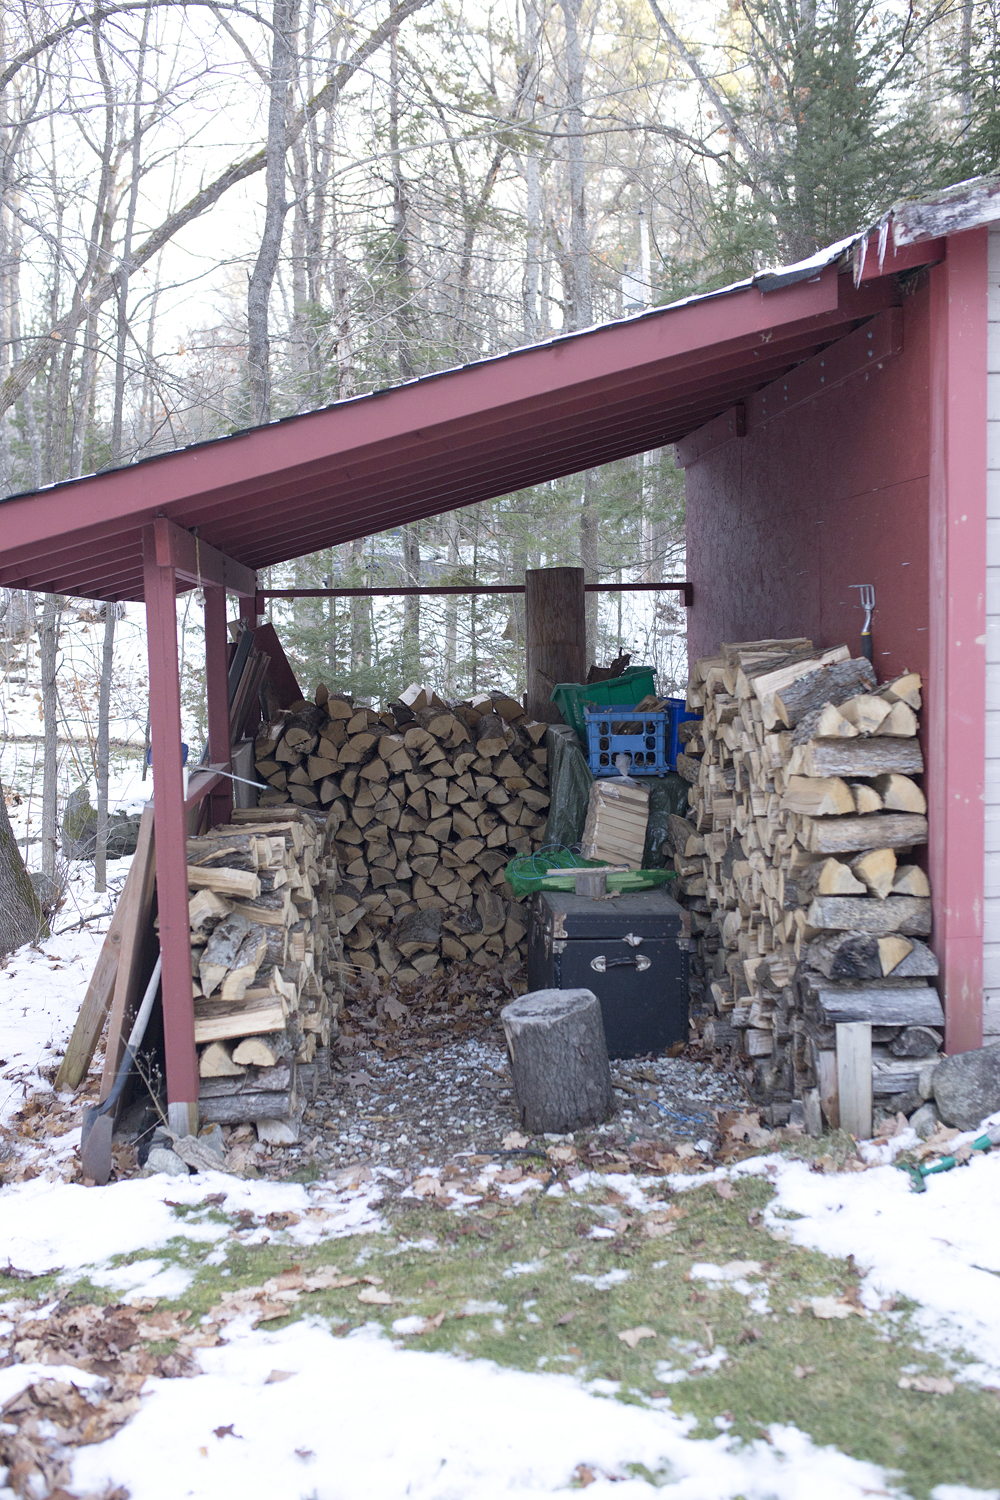 Wood pile in shed outside of home